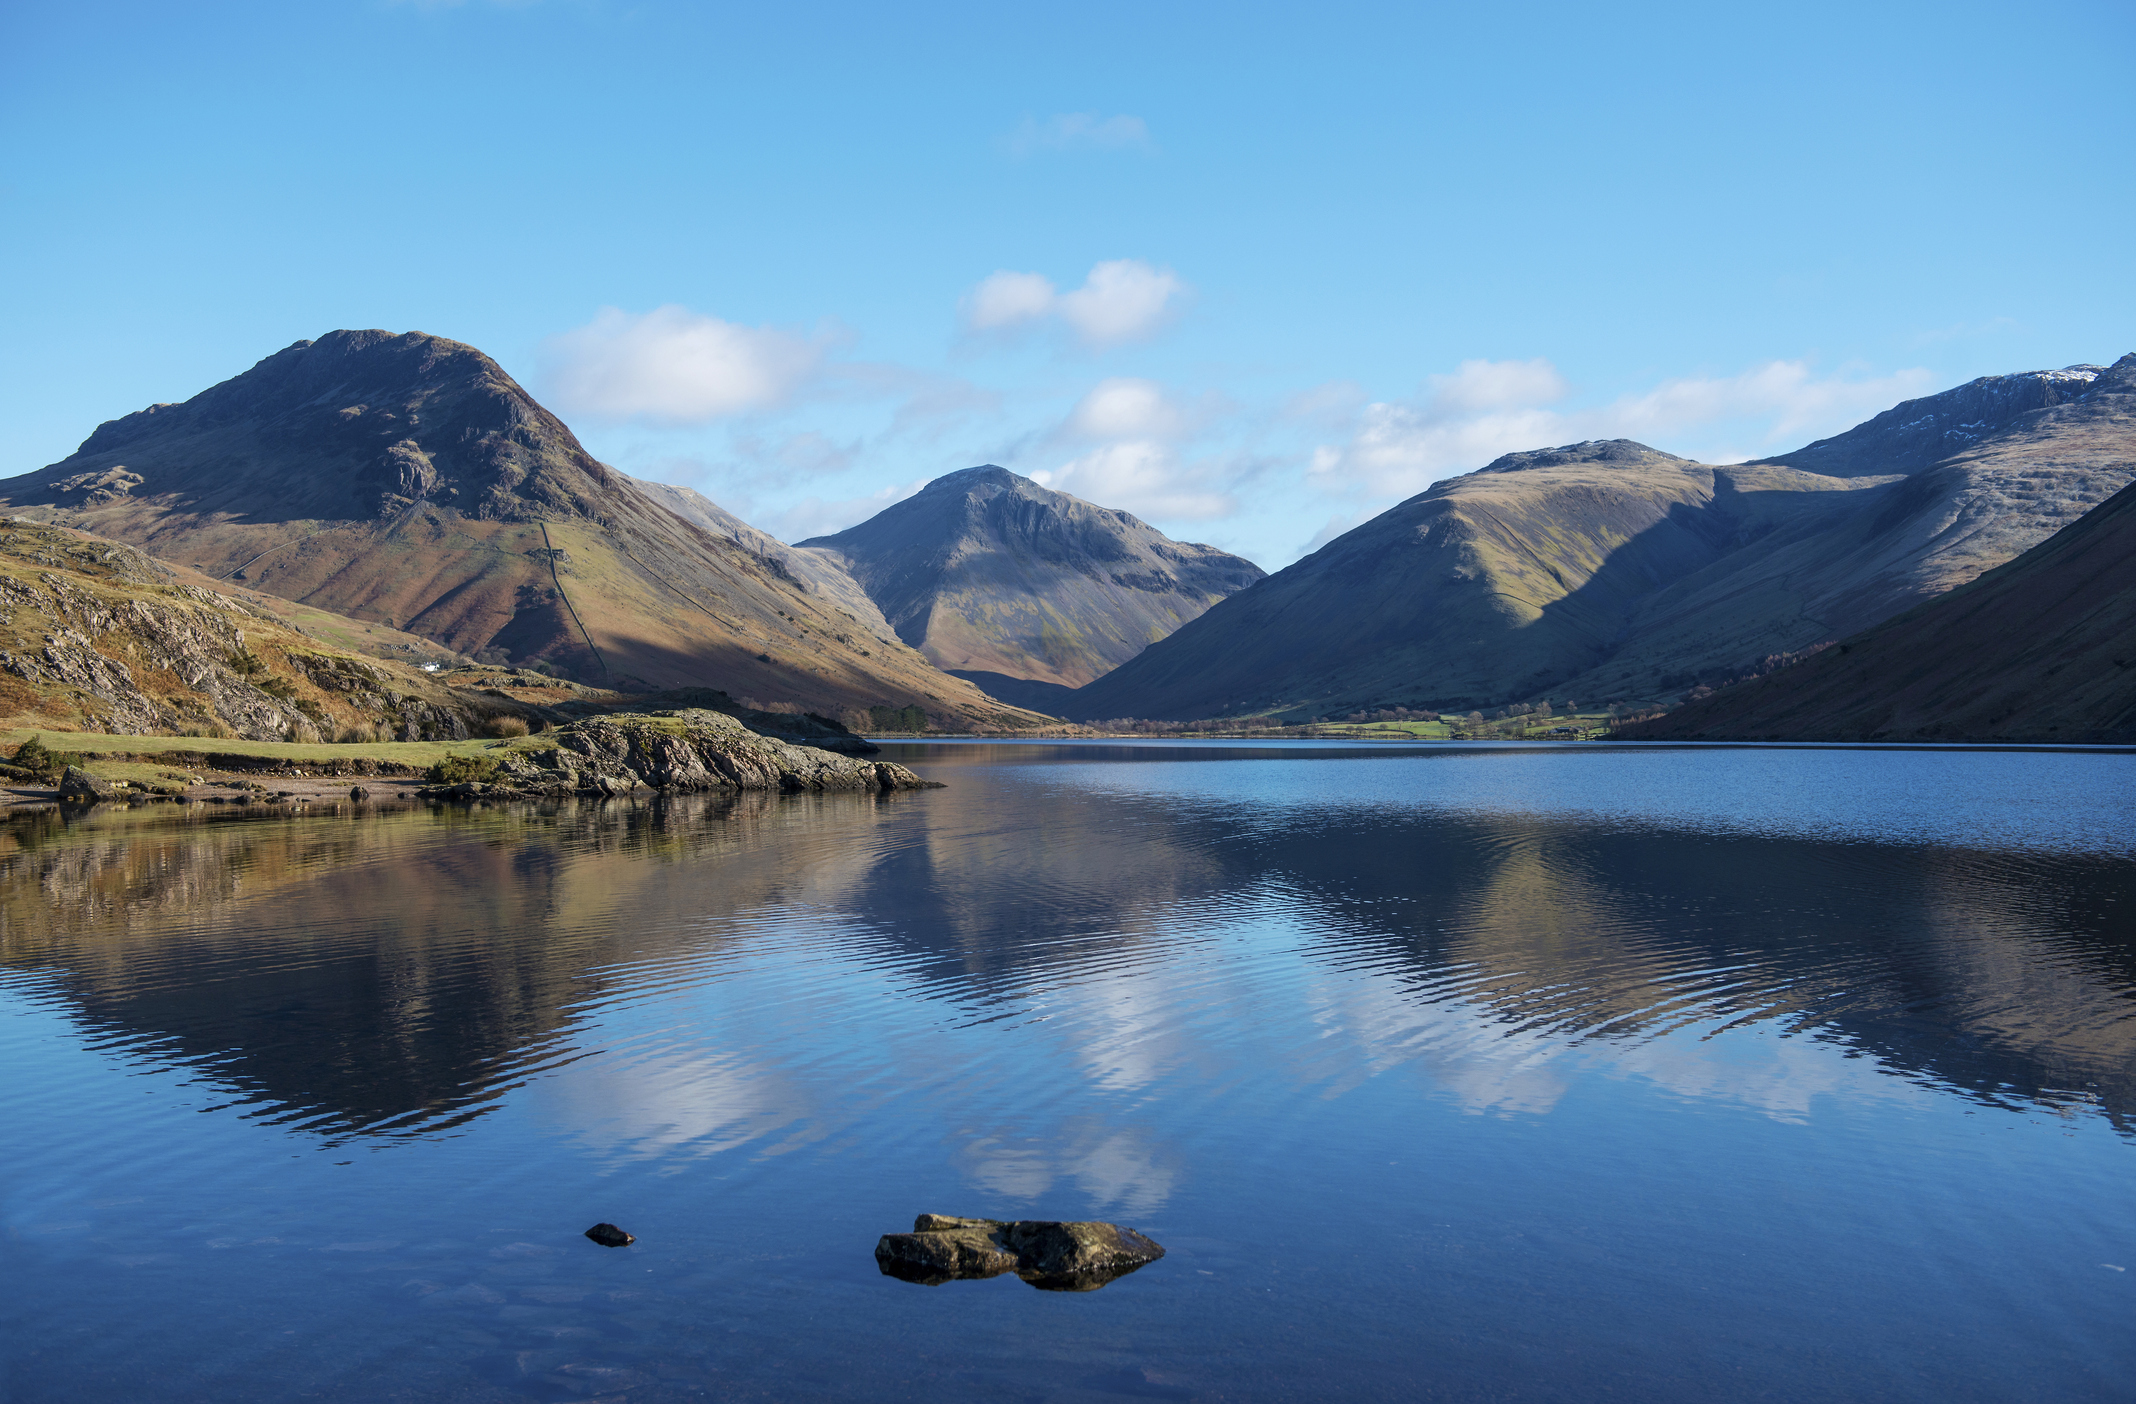 Often described as 'Britain's Favourite View" these are the mountains at Wasdale Head looking across Wast Water, England's deepest lake. The hills in view are Yewbarrow, Great Gable, Lingmell and Scafell Pike on the right.